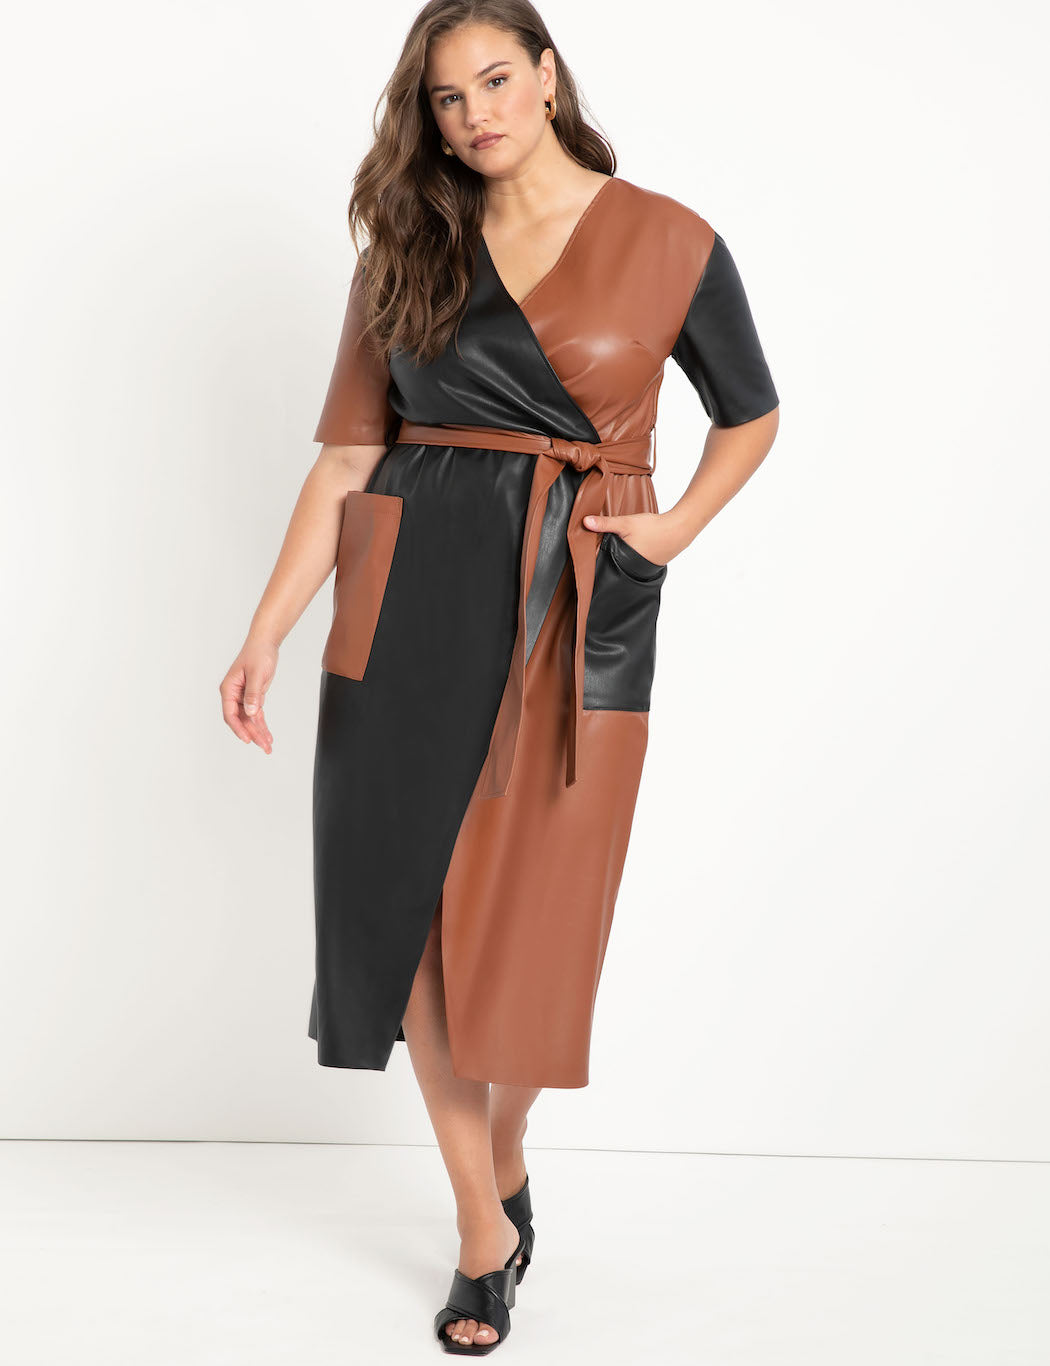 Eloquii | Colorblocked Faux Leather Wrap Dress in Totally Black / Peru Tan  | ELOQUII Unlimited